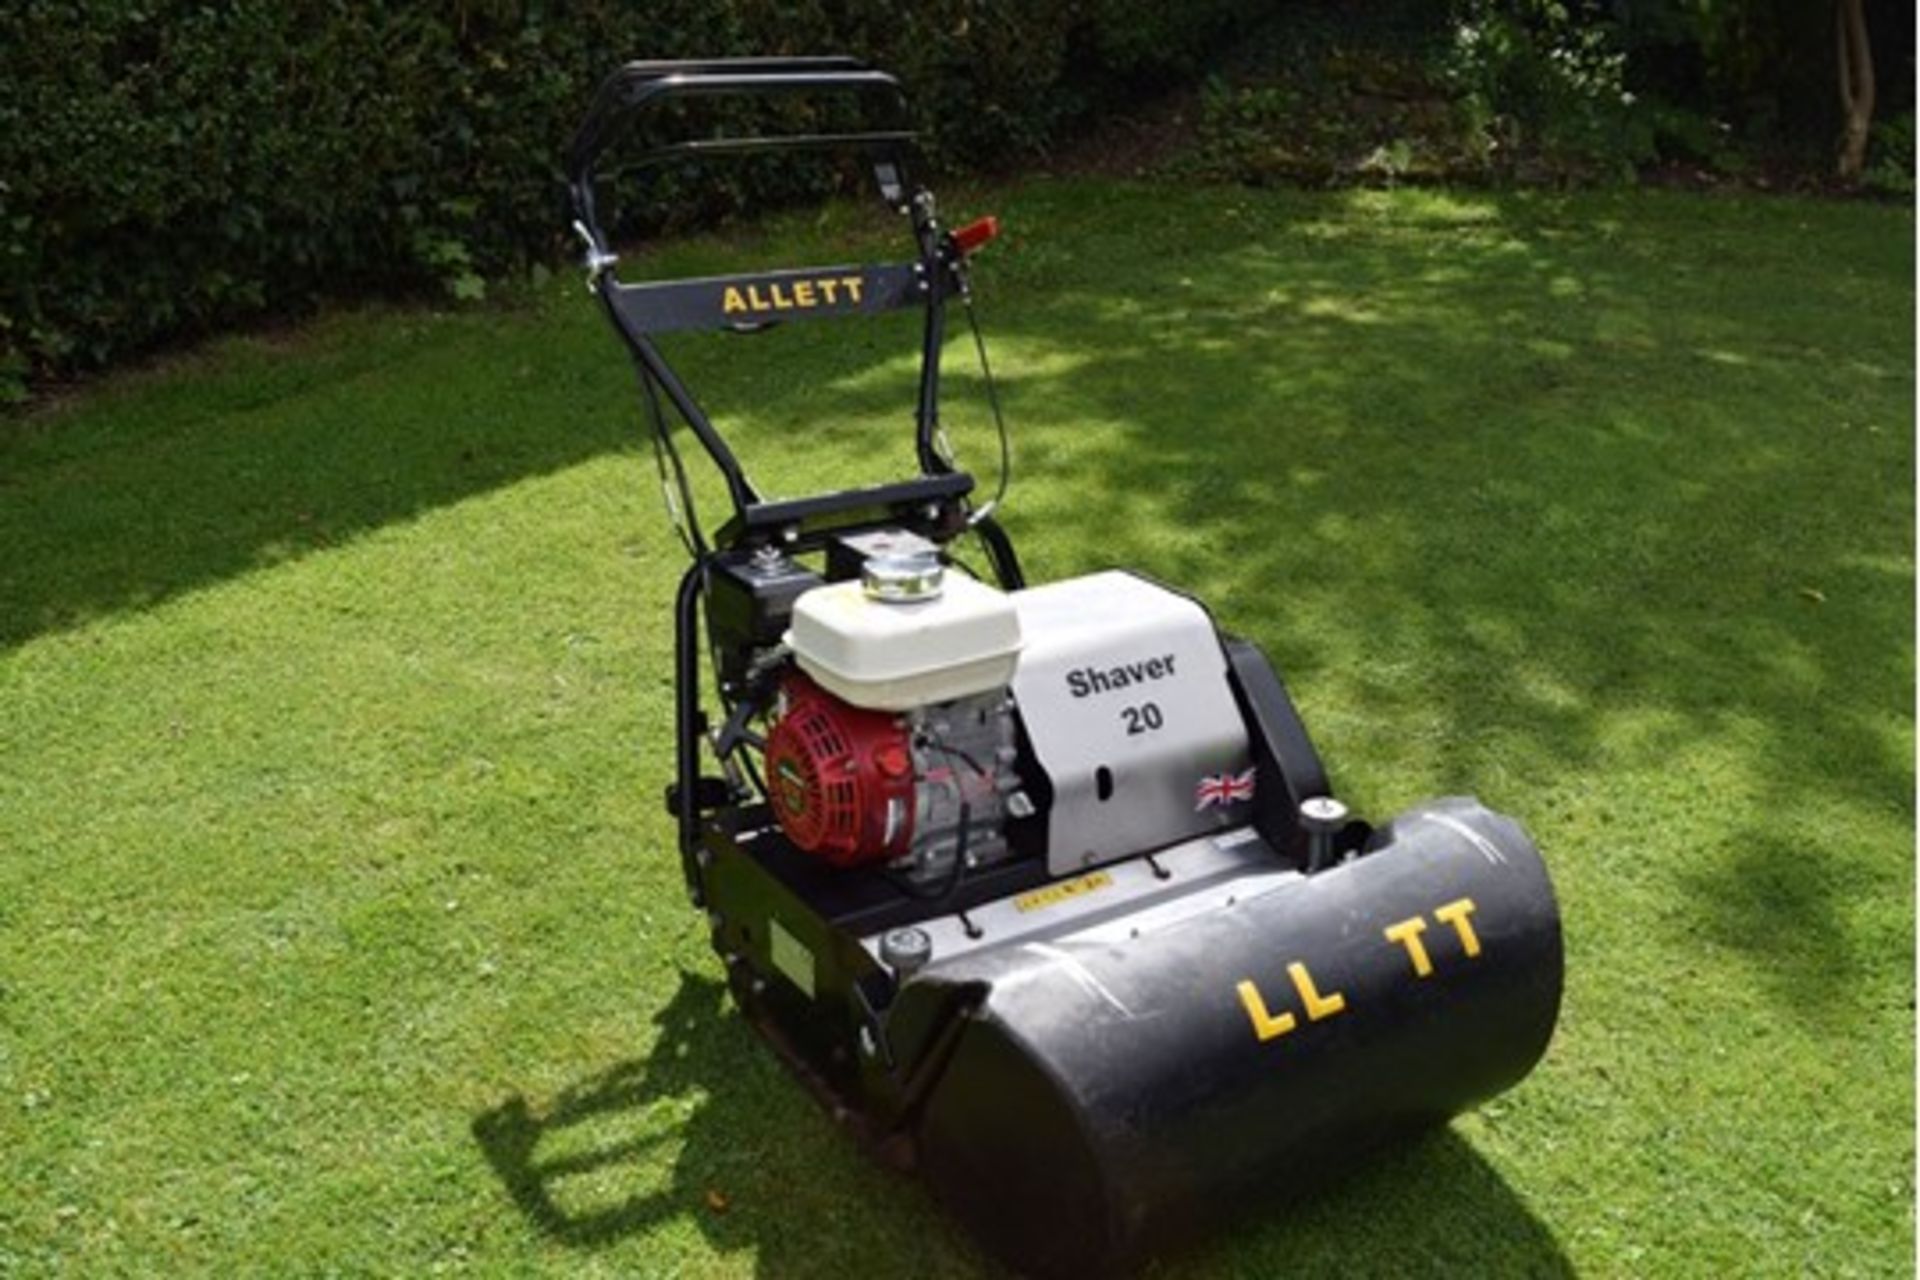 2012 Allett Shaver 20, 10 Blade Cylinder Mower With Grass Box (2) - Image 7 of 8